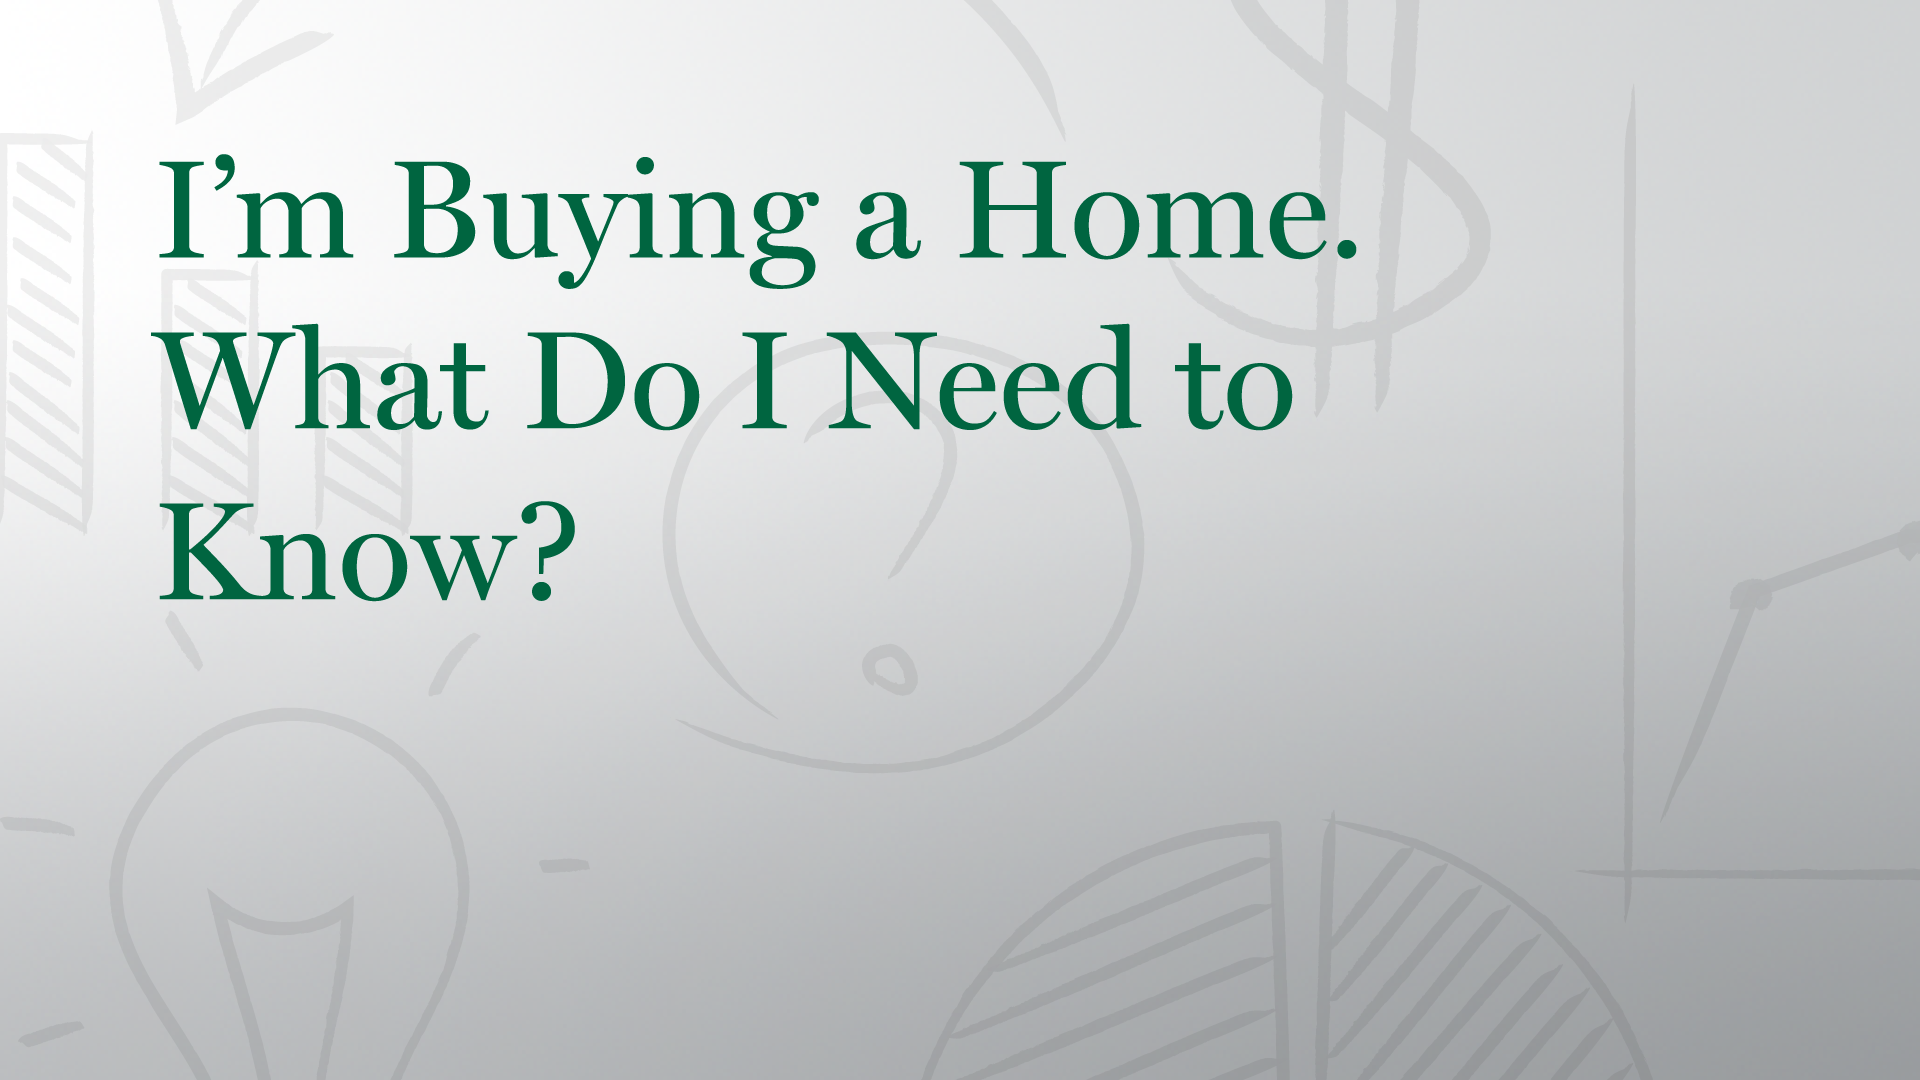 I'm Buying a Home. What Do I Need to Know?